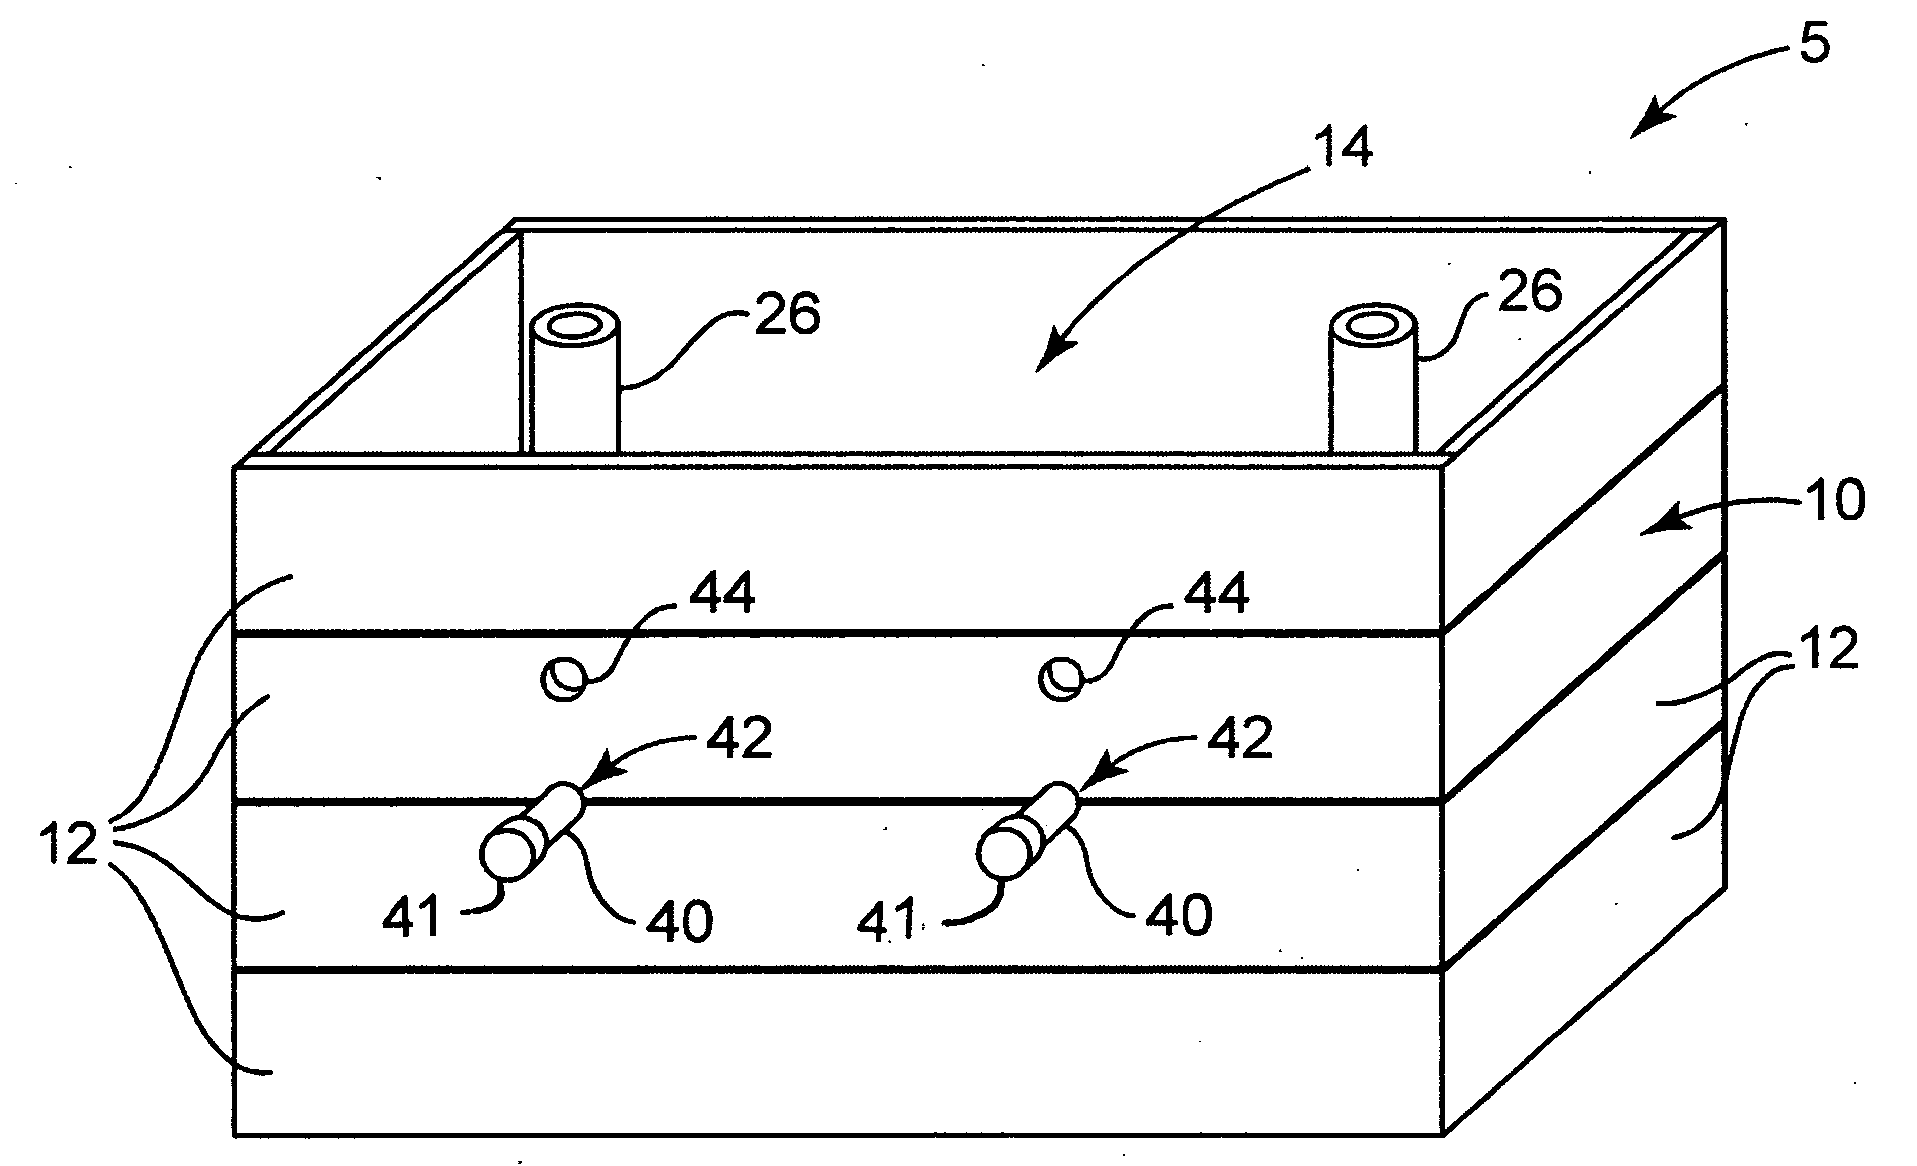 Garden or planter system with elevated bed and water reservoir